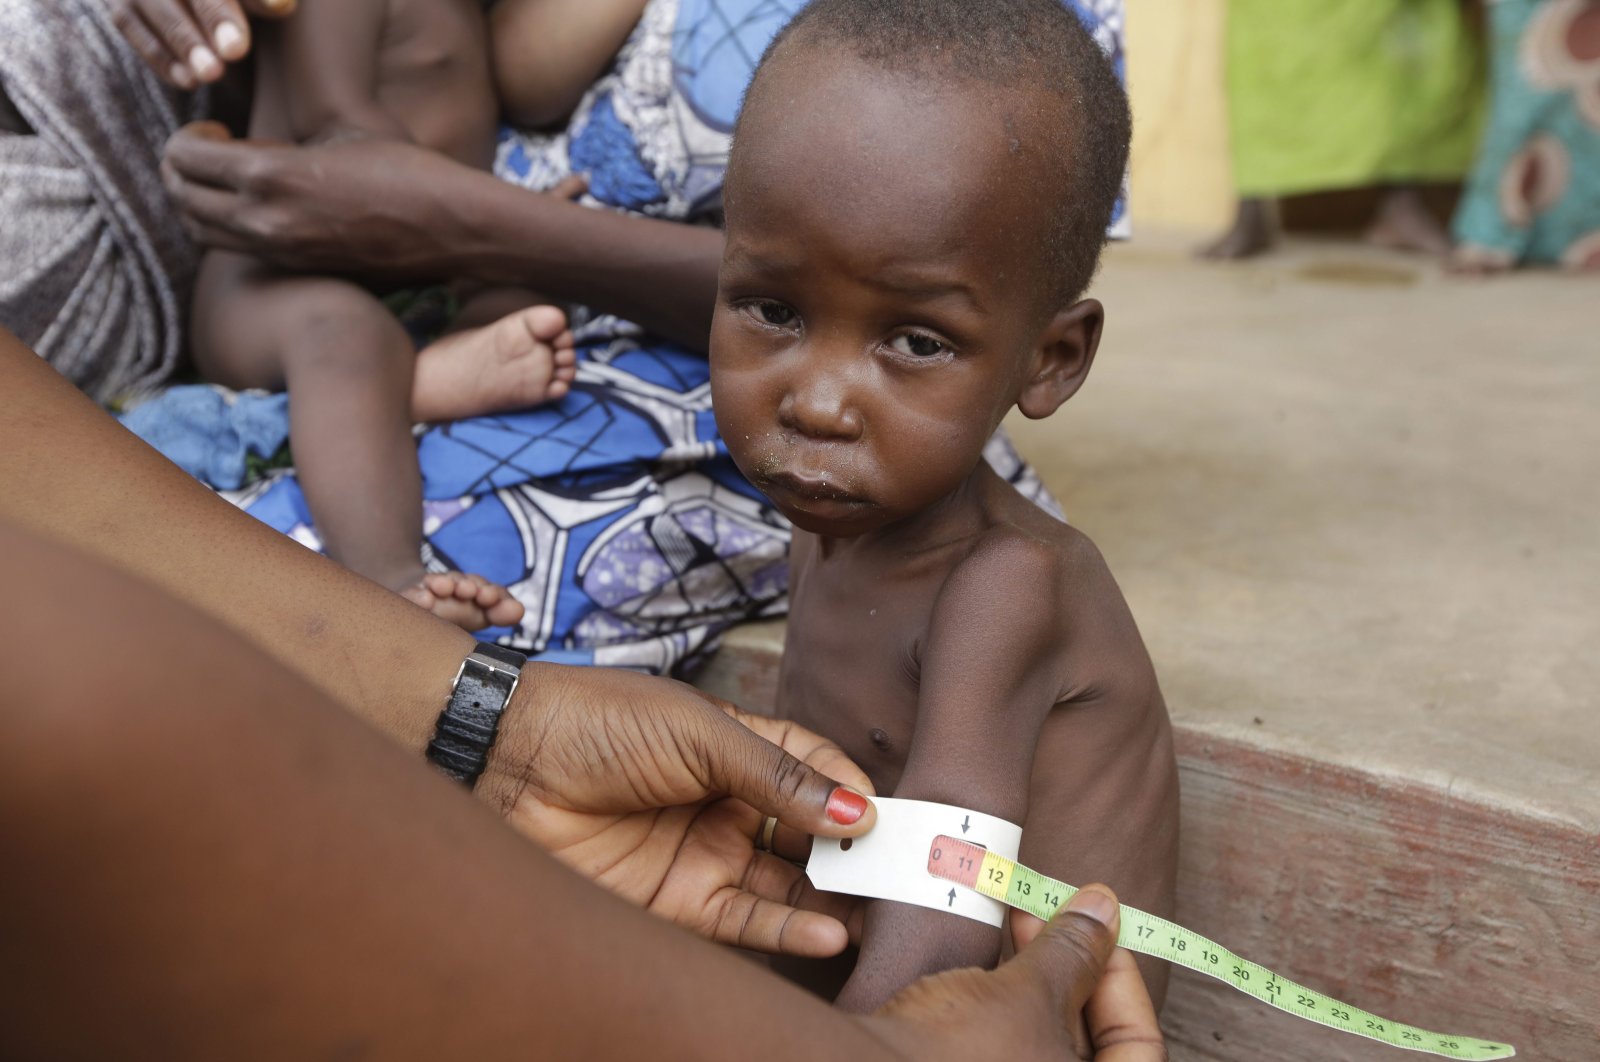 A doctor attends to a malnourished child at a refugee camp in Yola, Nigeria on  May 3, 2015. (AP Photo)